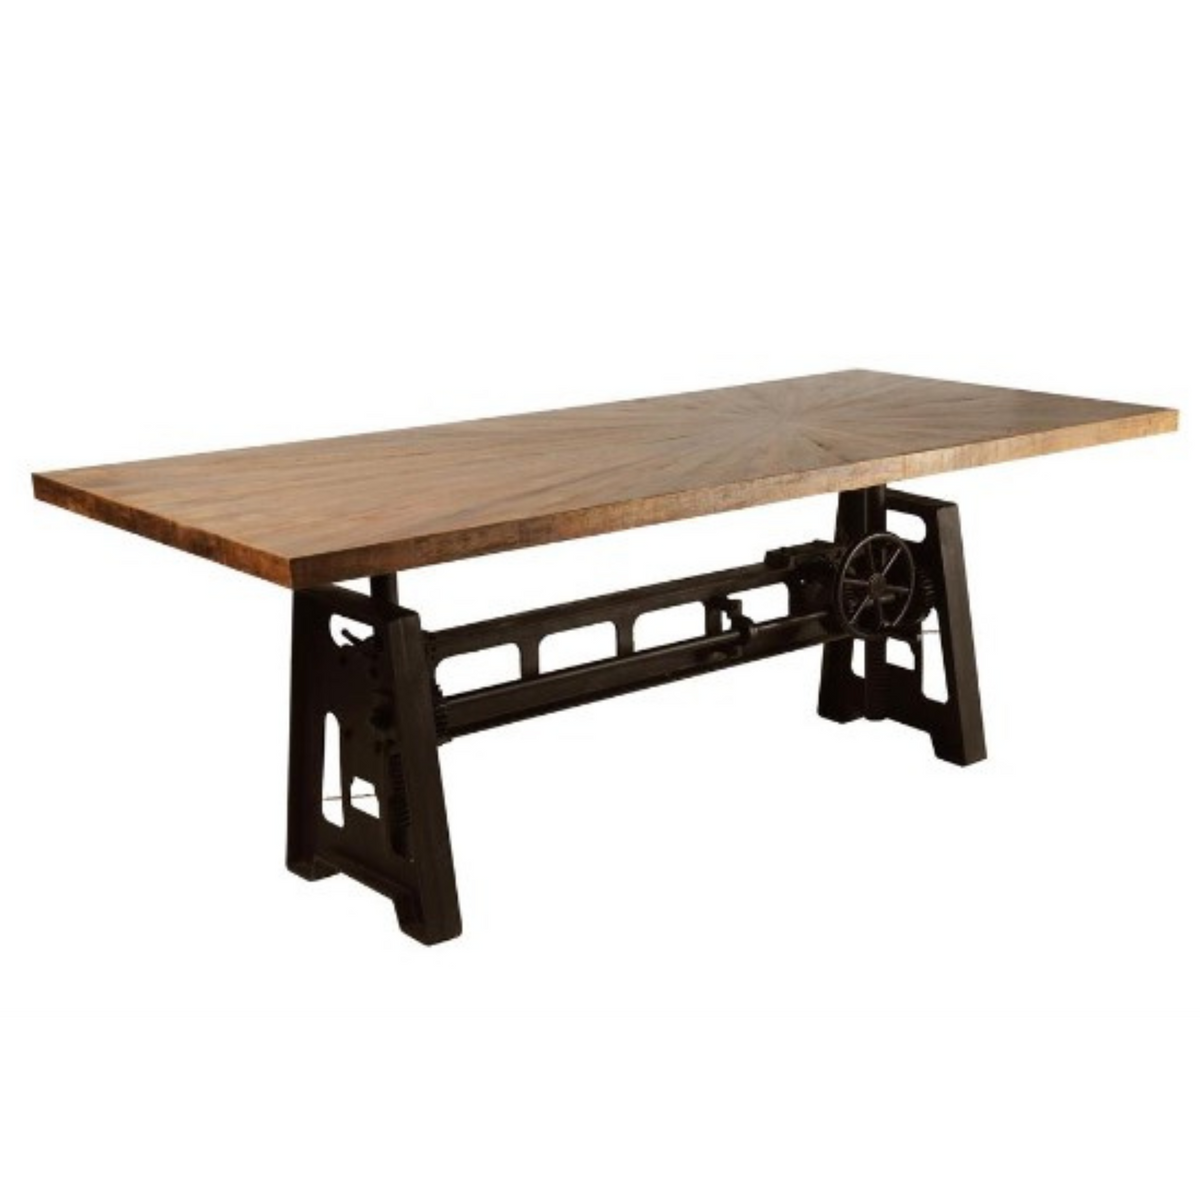 Del Sol Dining Table